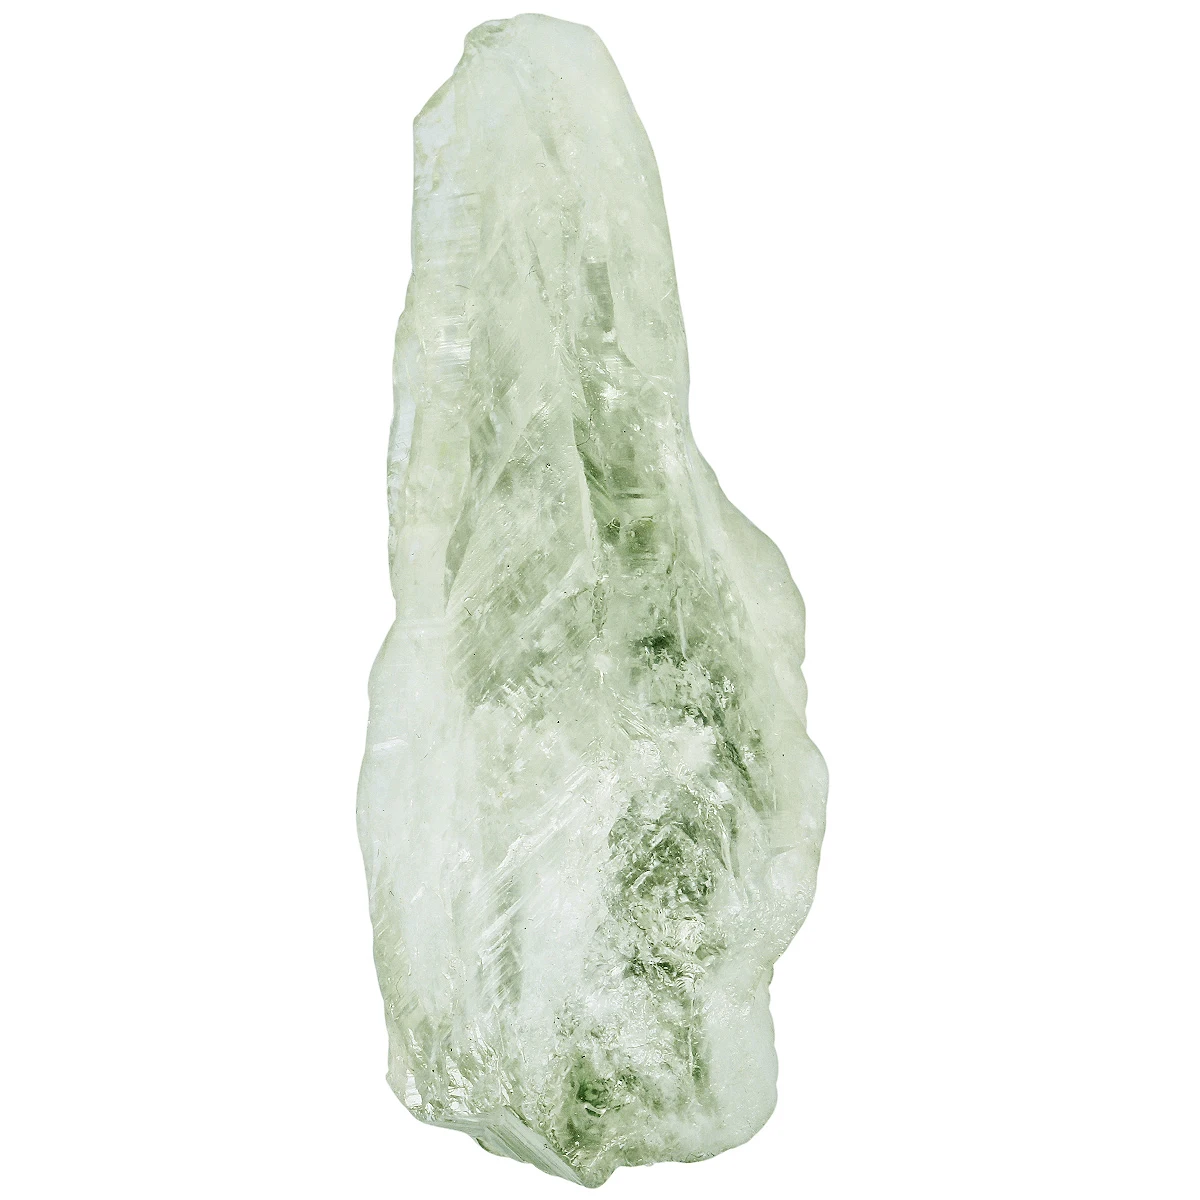 1Pc Irregular Green Crystal Quartz Point Wand Healing Rough Stone Minerals Specimen For Home Decor DIY Jewelry Accessories 1 pair healing lucky crystal money tree with acrylic bookends book ends for shelves desktop organizer home office